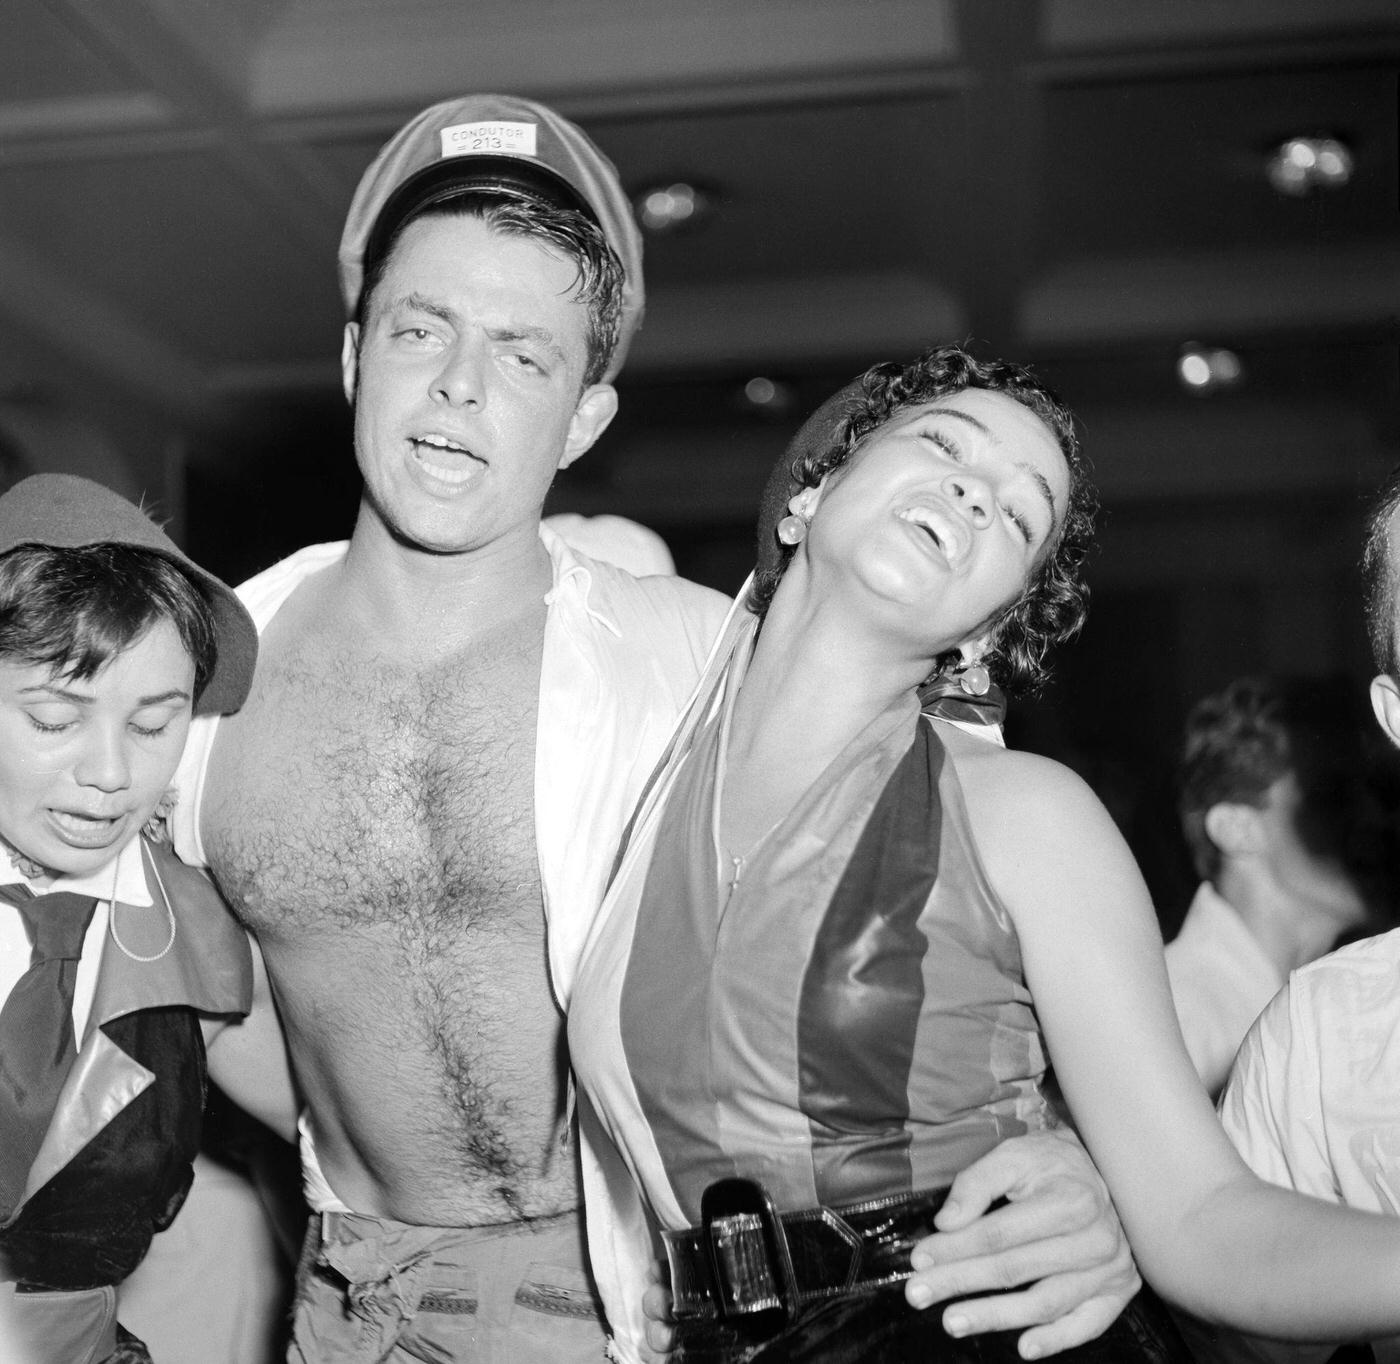 Carnival partygoers celebrate during Rio de Janeiro's Carnival. 1953